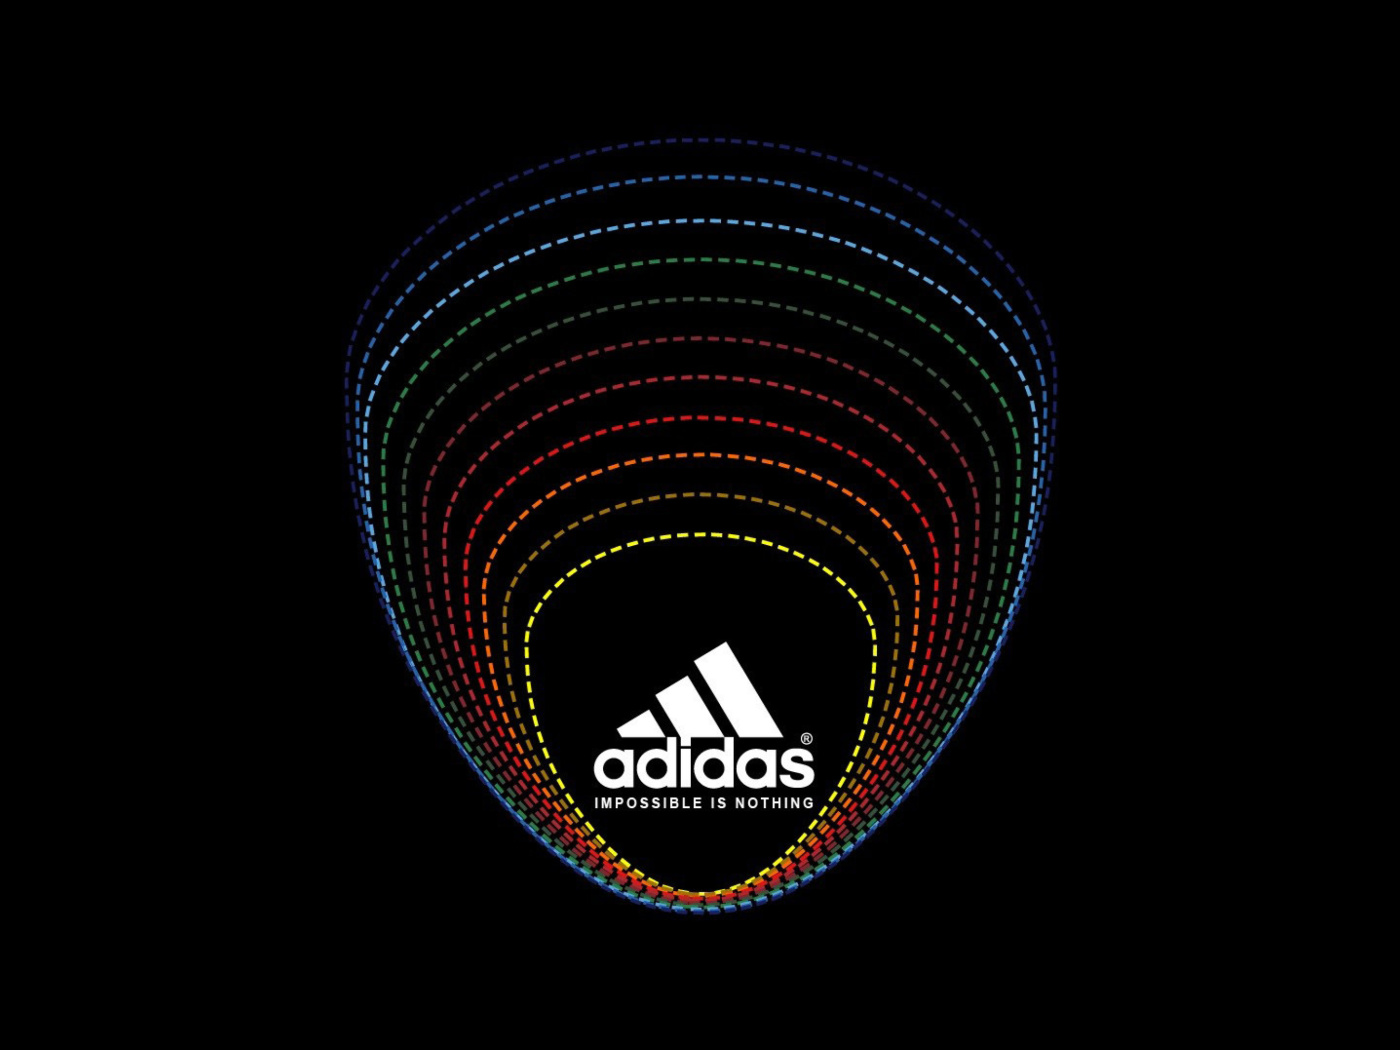 Adidas Tagline, Impossible is Nothing wallpaper 1400x1050